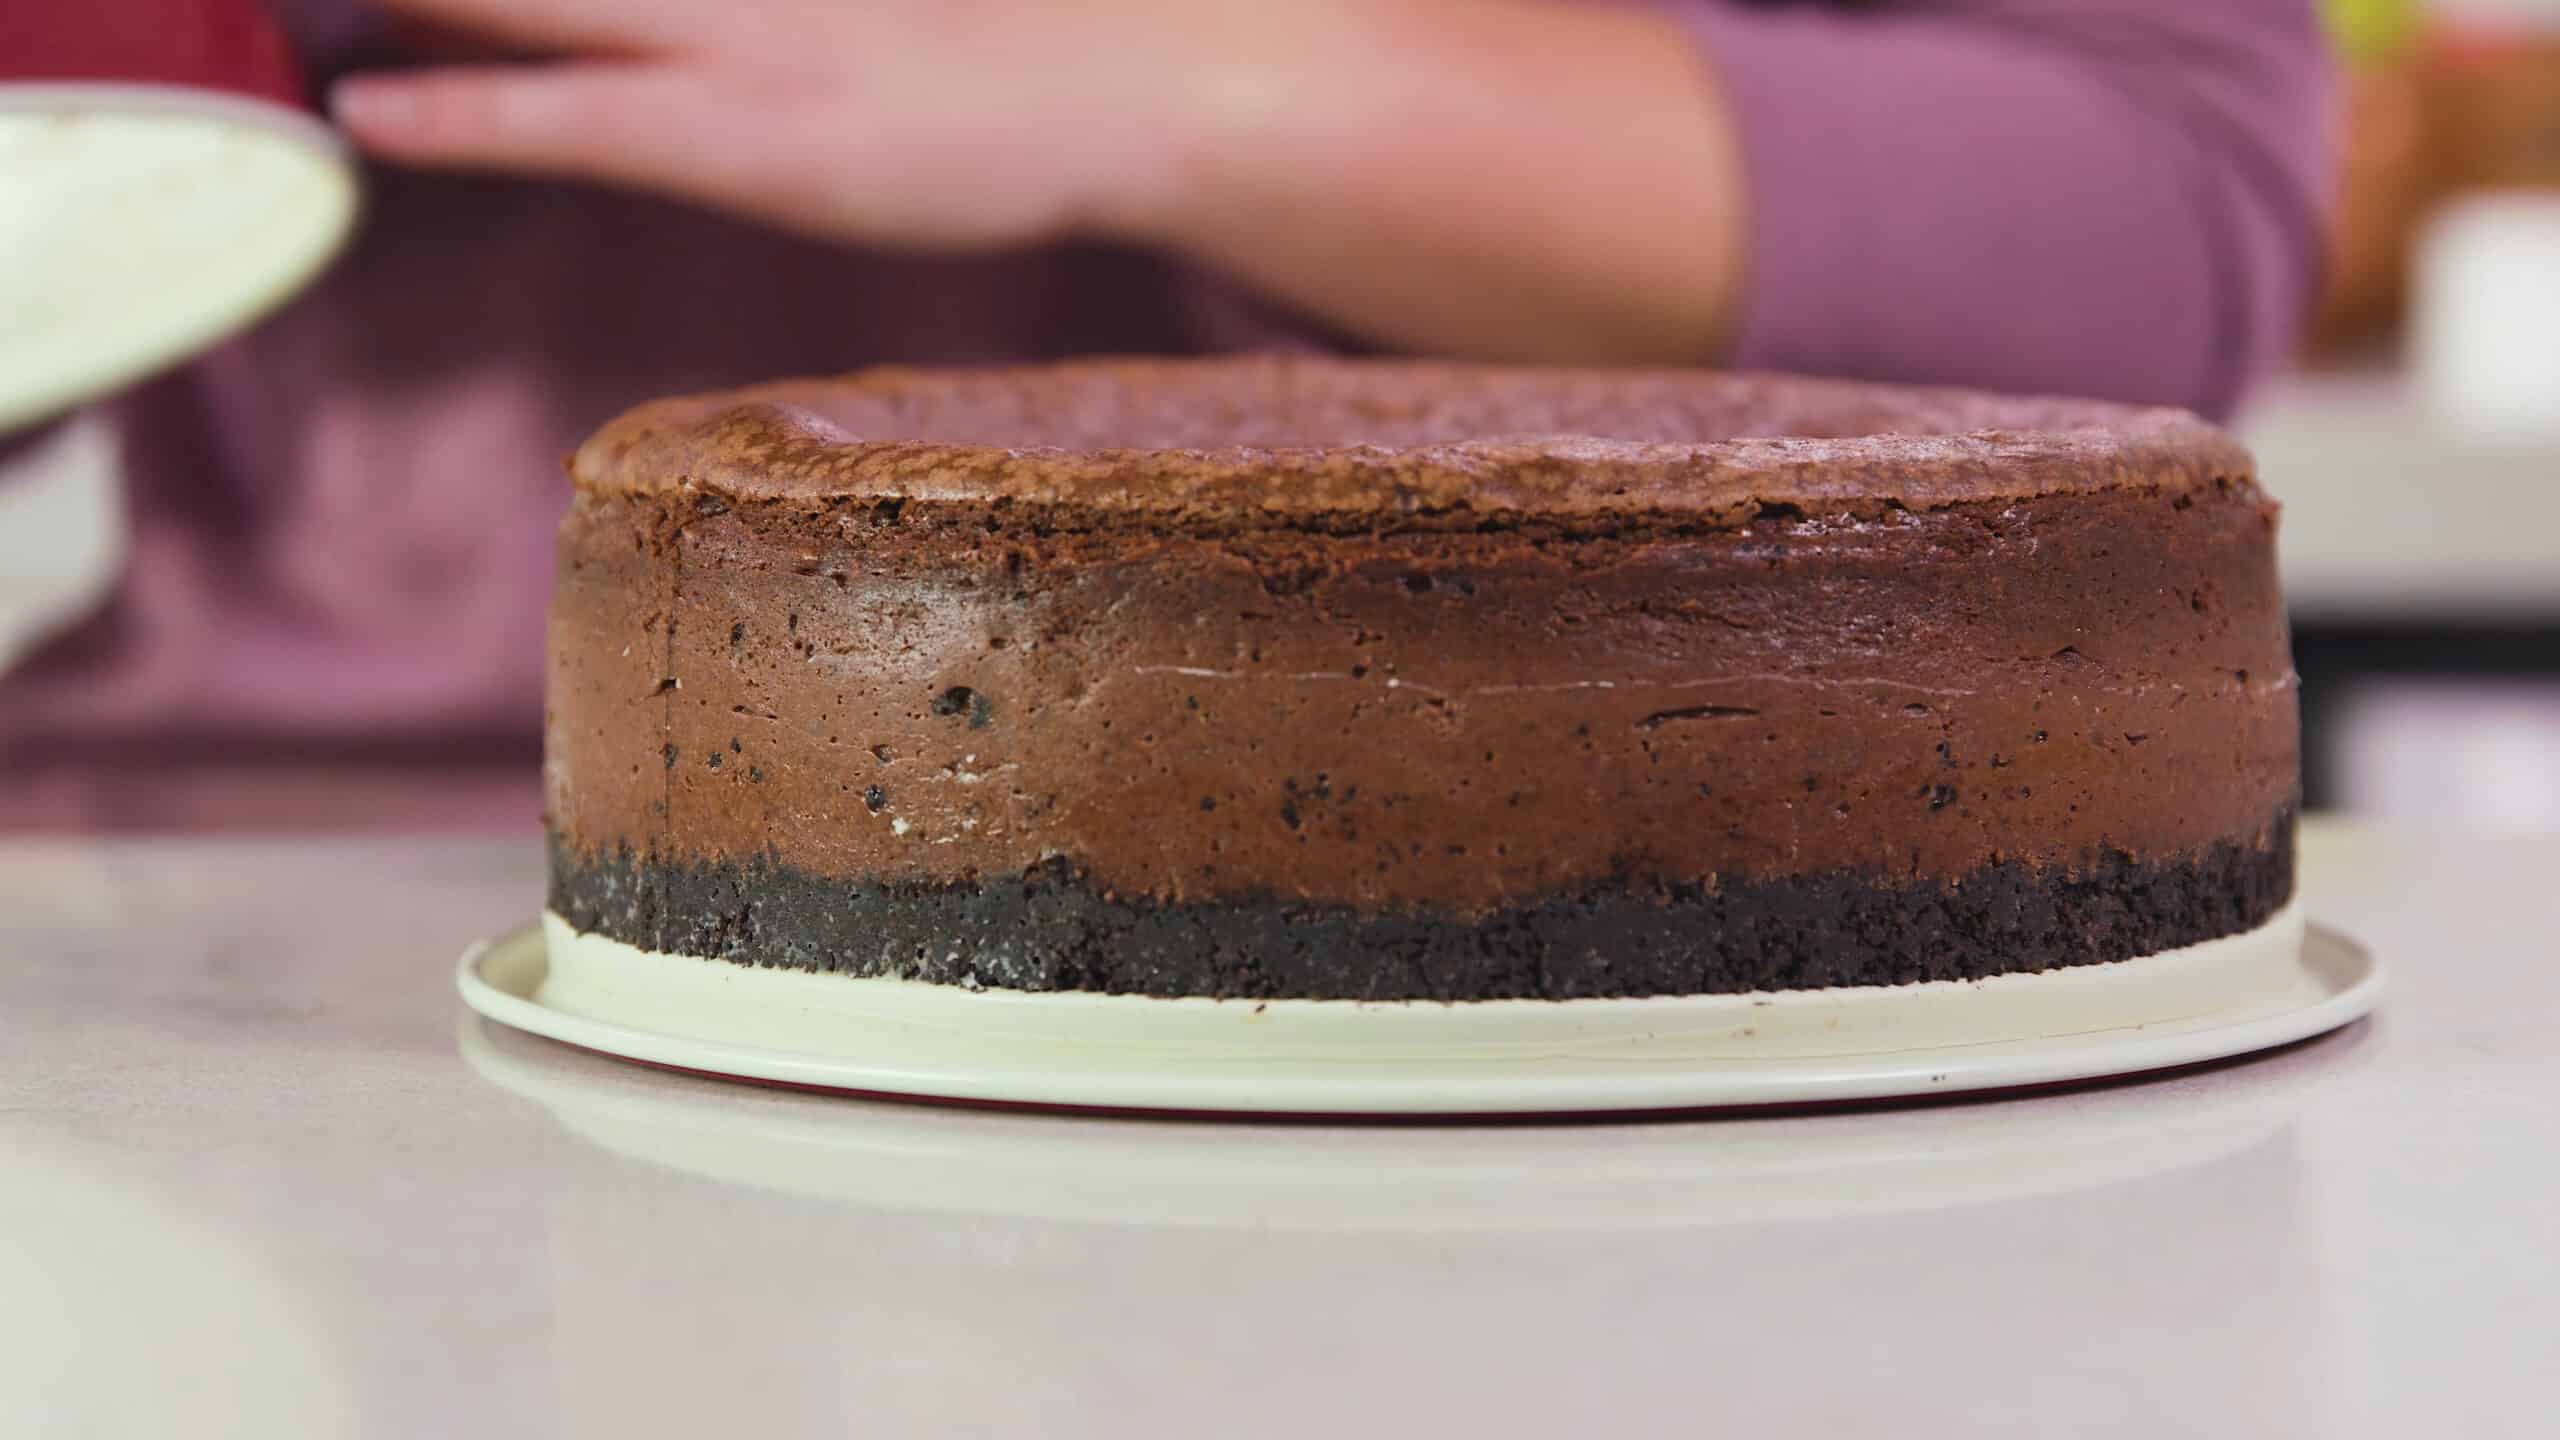 Side view of completely baked chocolate cheesecake with Oreo crust resting on the bottom part of the metal spring form pan after the side has been removed.